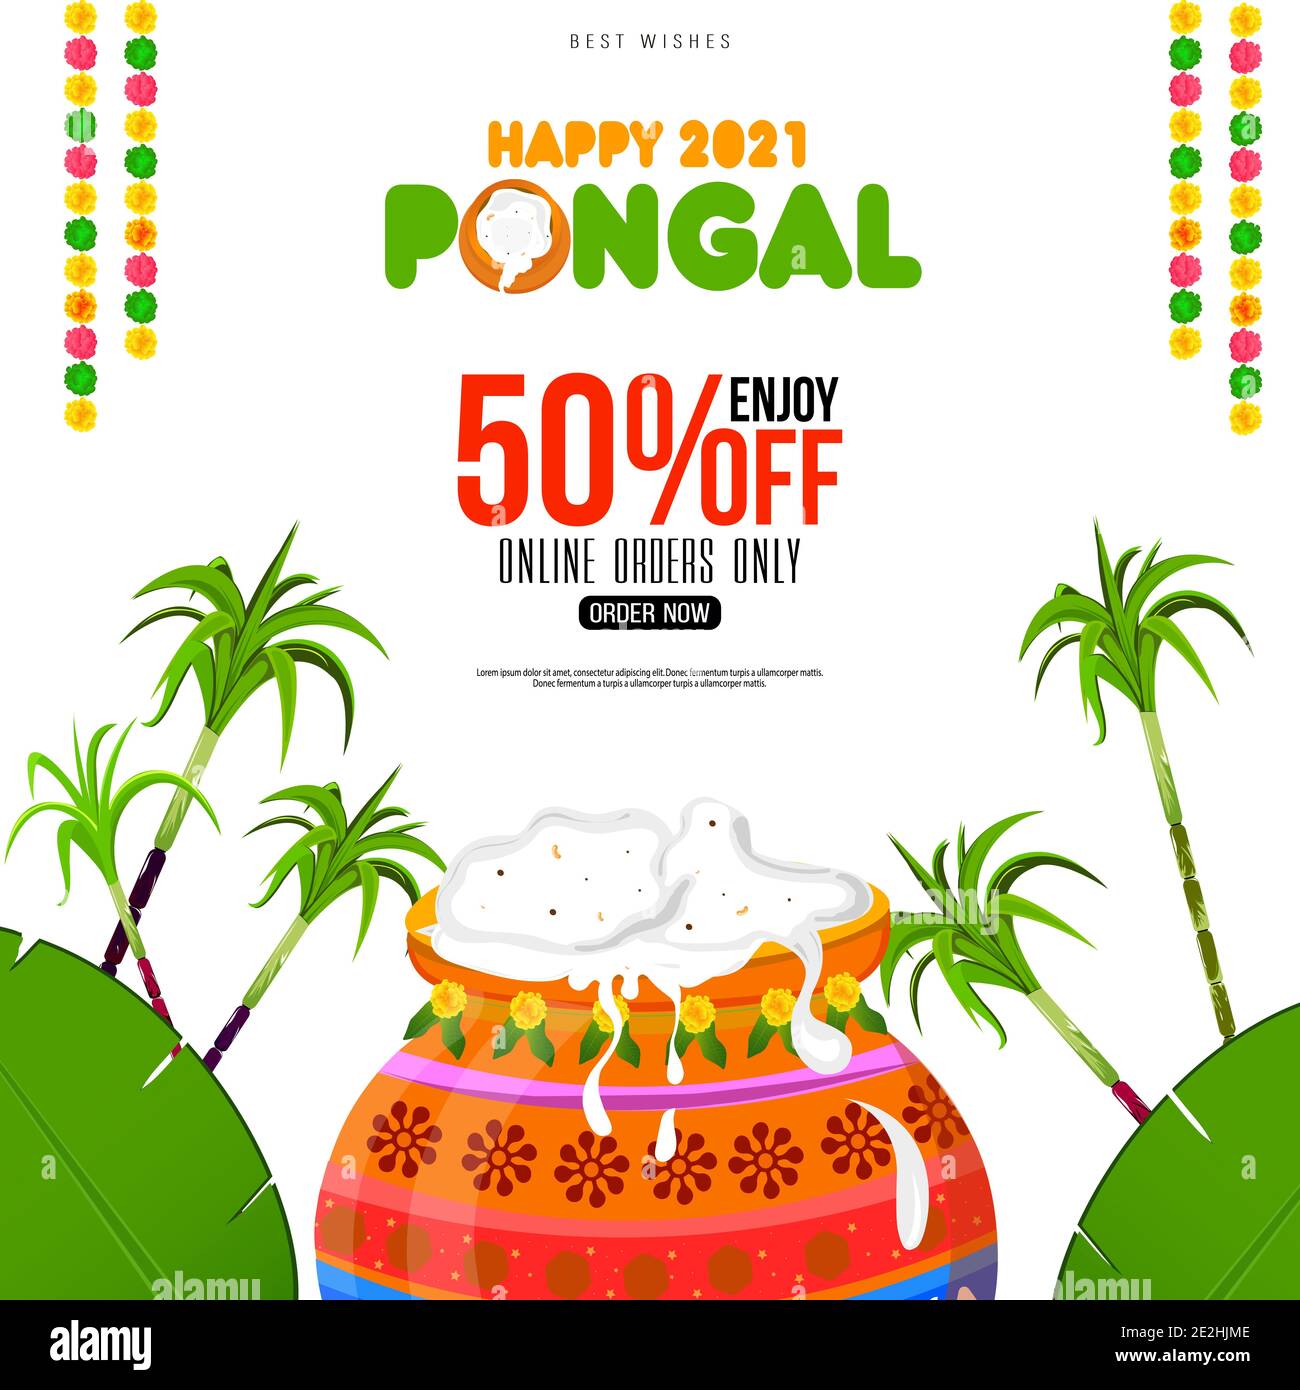 Pongal Festival Offer Banner Design with 50% Discount Offers Stock ...